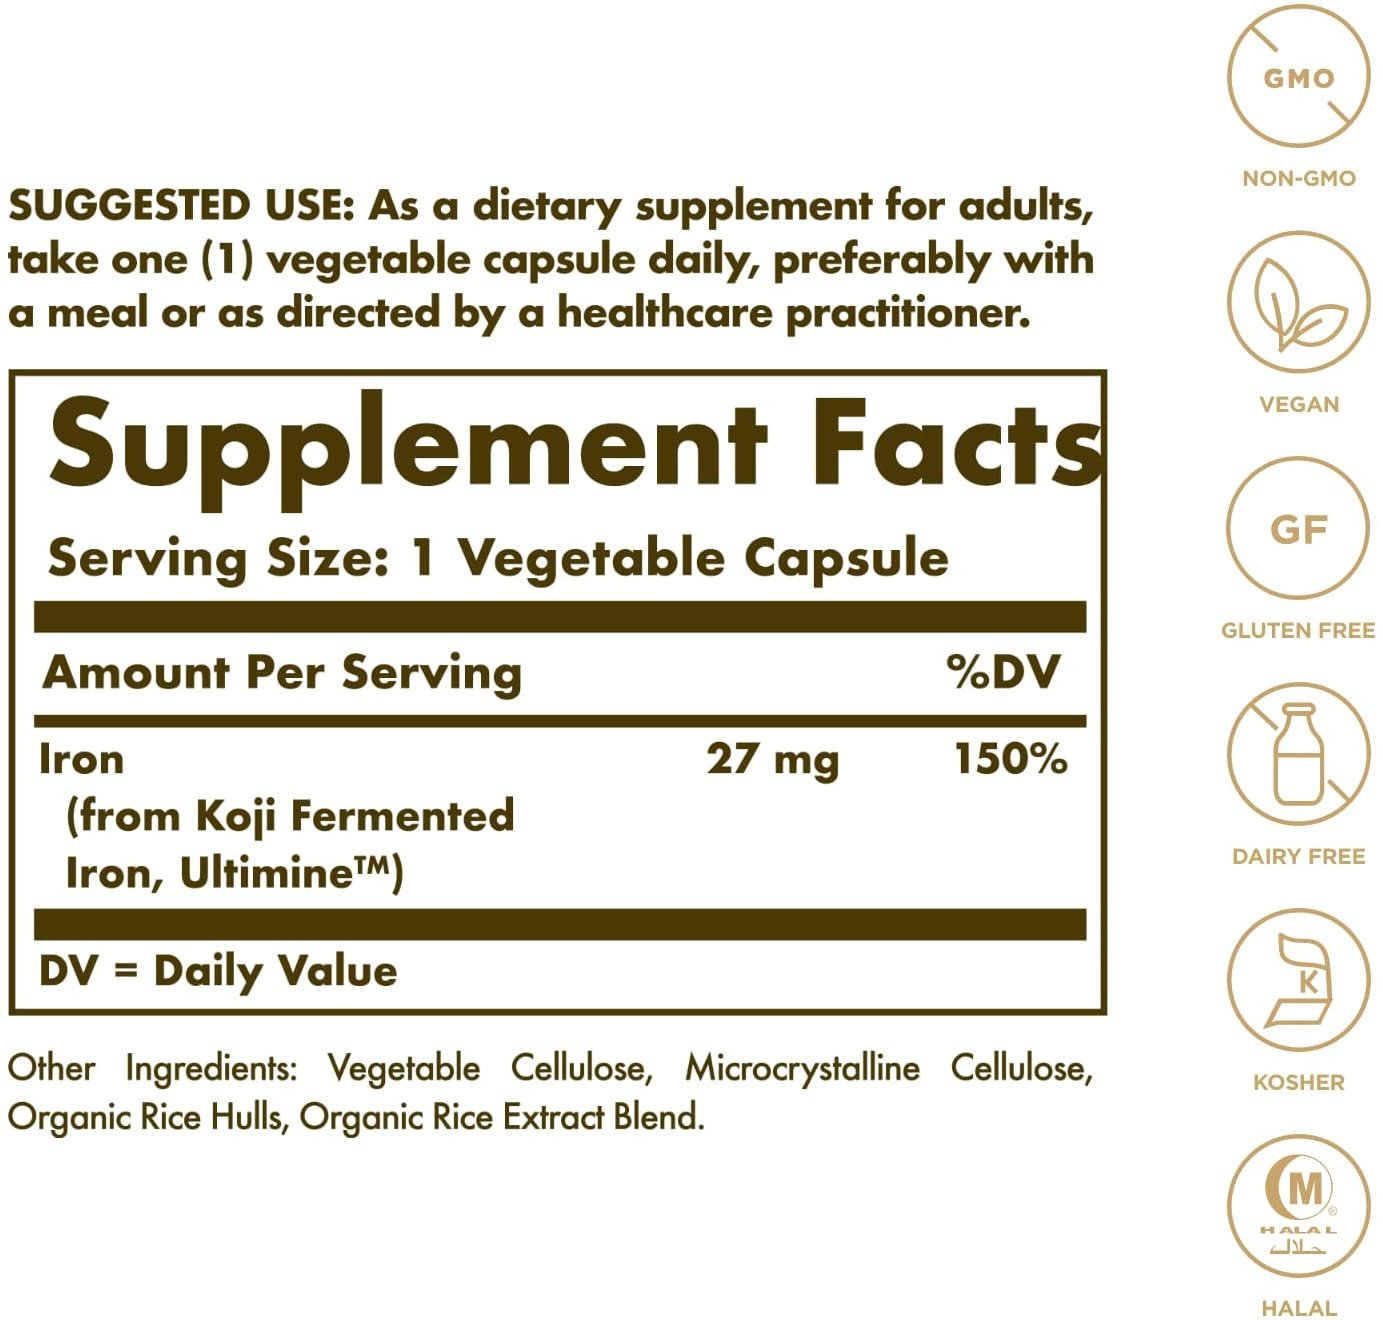 Solgar Earth Source Food Fermented Koji Iron 27mg, 60 Vegetable Capsules - Higher-Absorption, Slow-Release Iron - Gentle on The Stomach - Non-GMO, Vegan, Gluten Free, Dairy Free, Kosher - 60 Servings